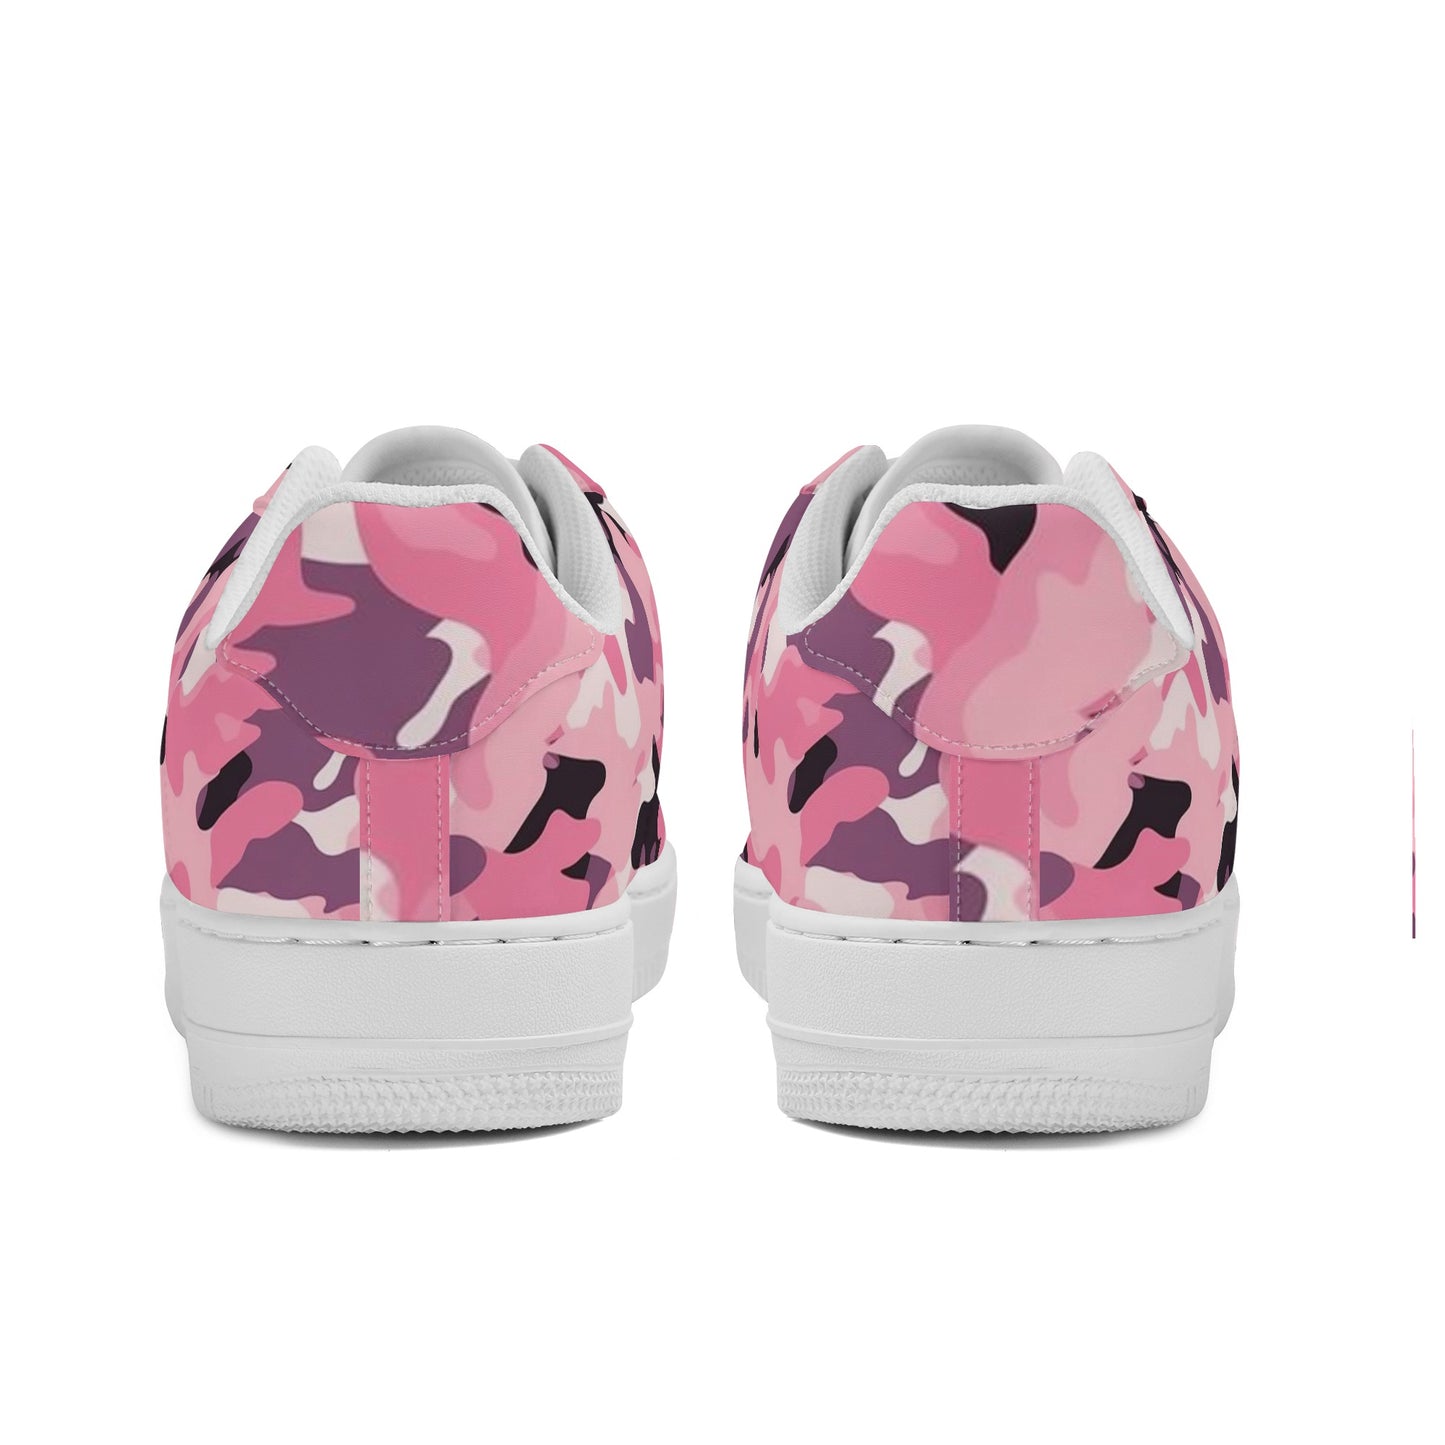 Pink Camo Women Vegan Leather Shoes, Camouflage Sneakers White Low Top Lace Up Custom Girls Aesthetic Flat Ladies